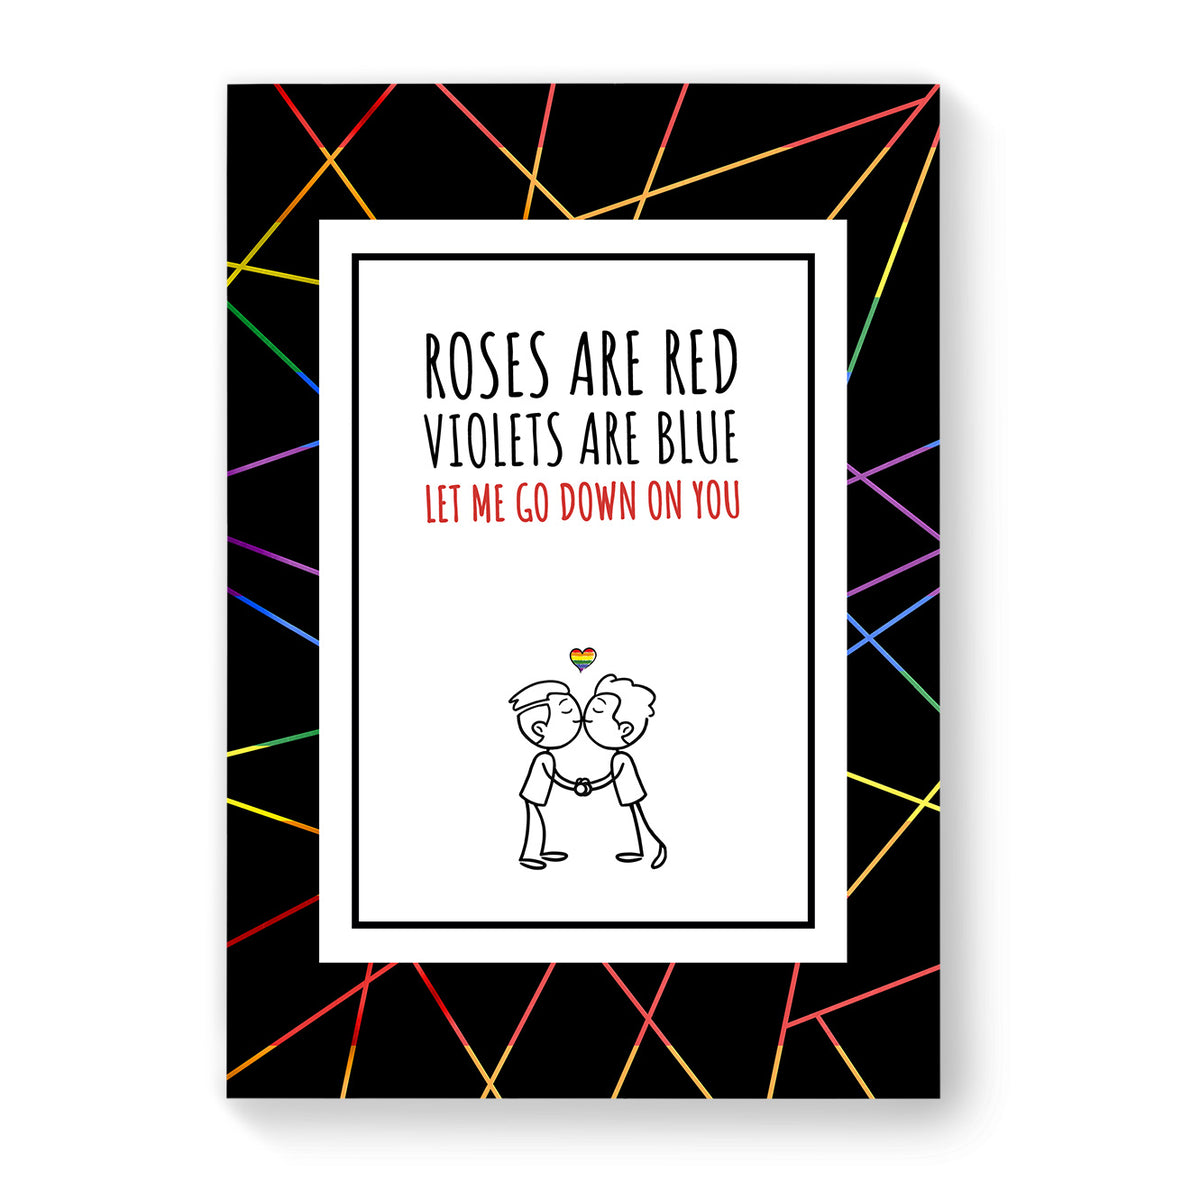 Let me go down on you - Gay Couple Card - Black Geometric | Gift